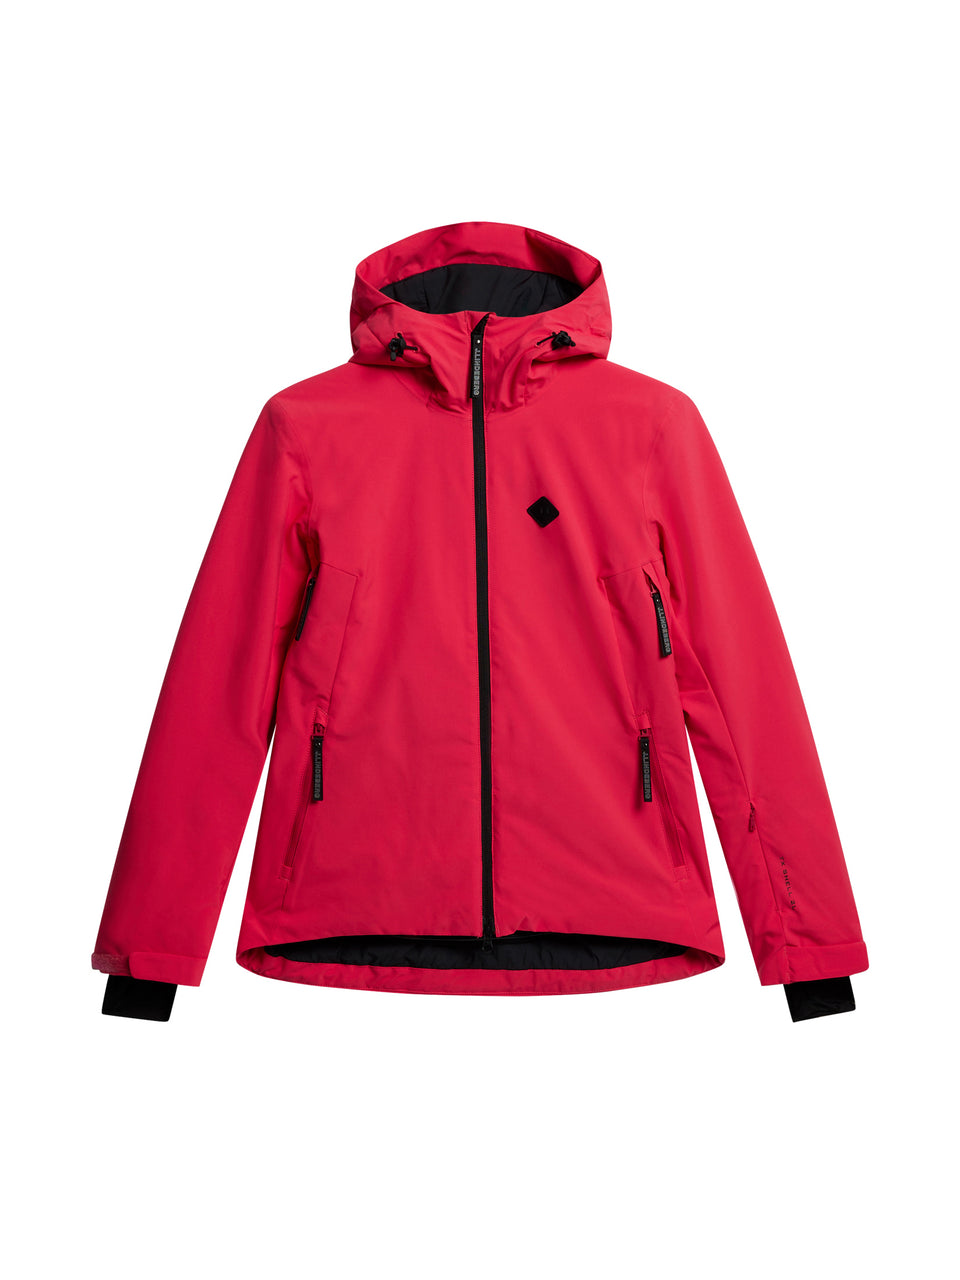 Starling Jacket / Rose Red